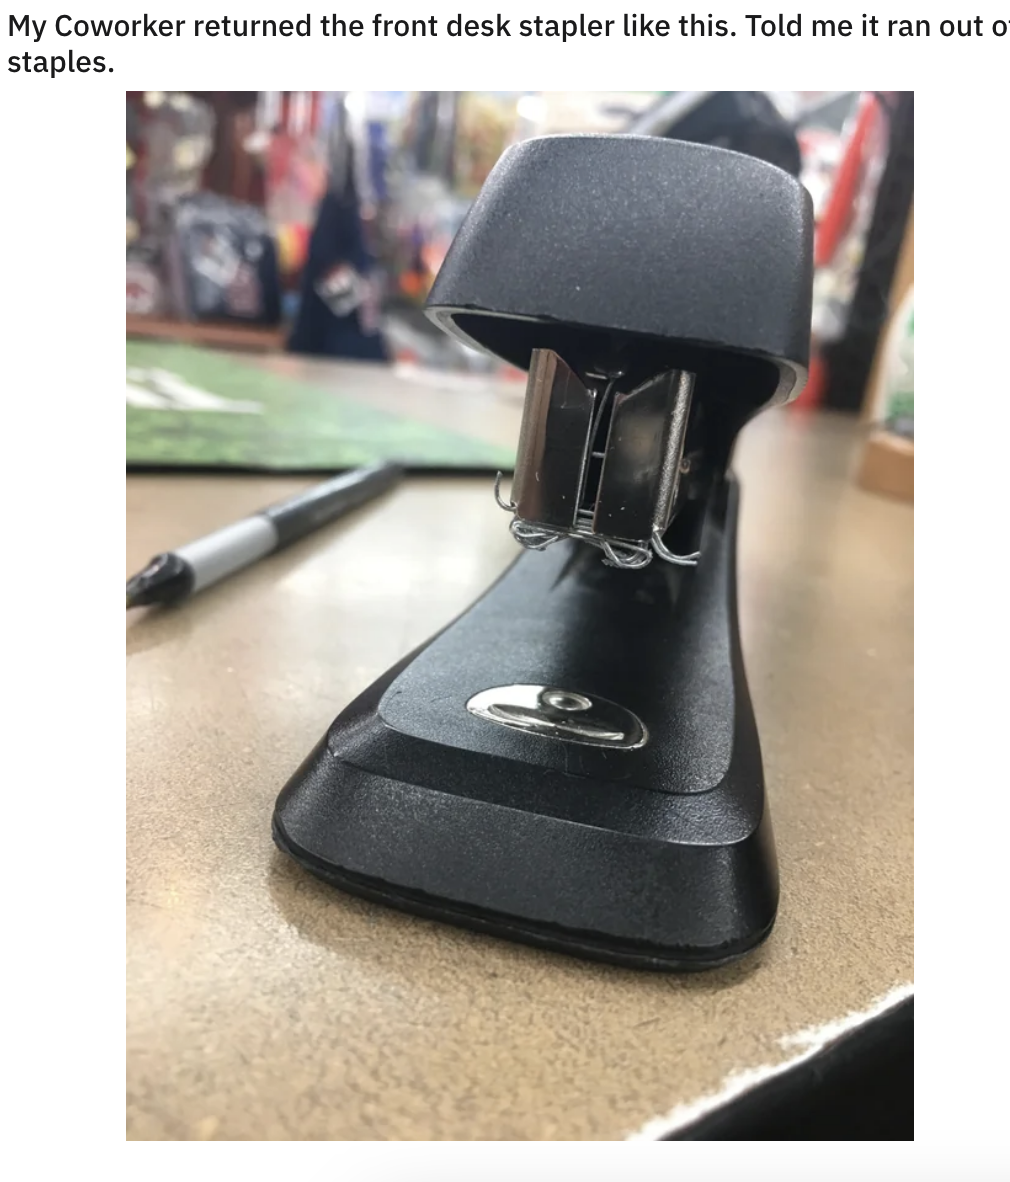 A stapler with the staples jammed